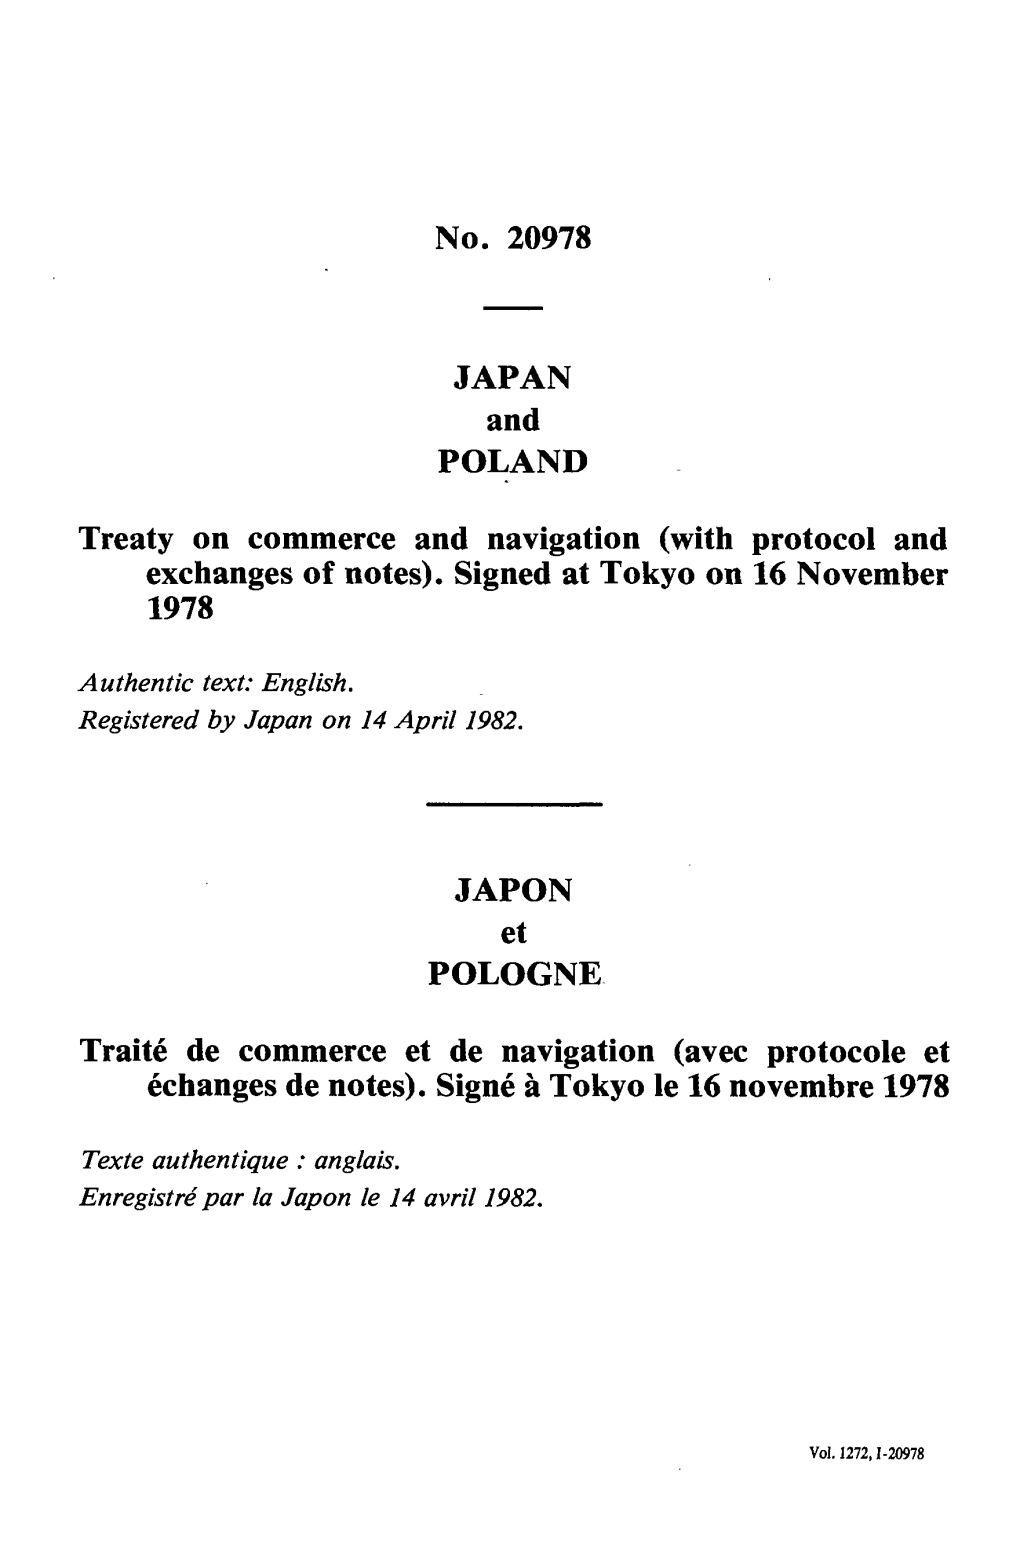 No. 20978 JAPAN and POLAND Treaty on Commerce and Navigation